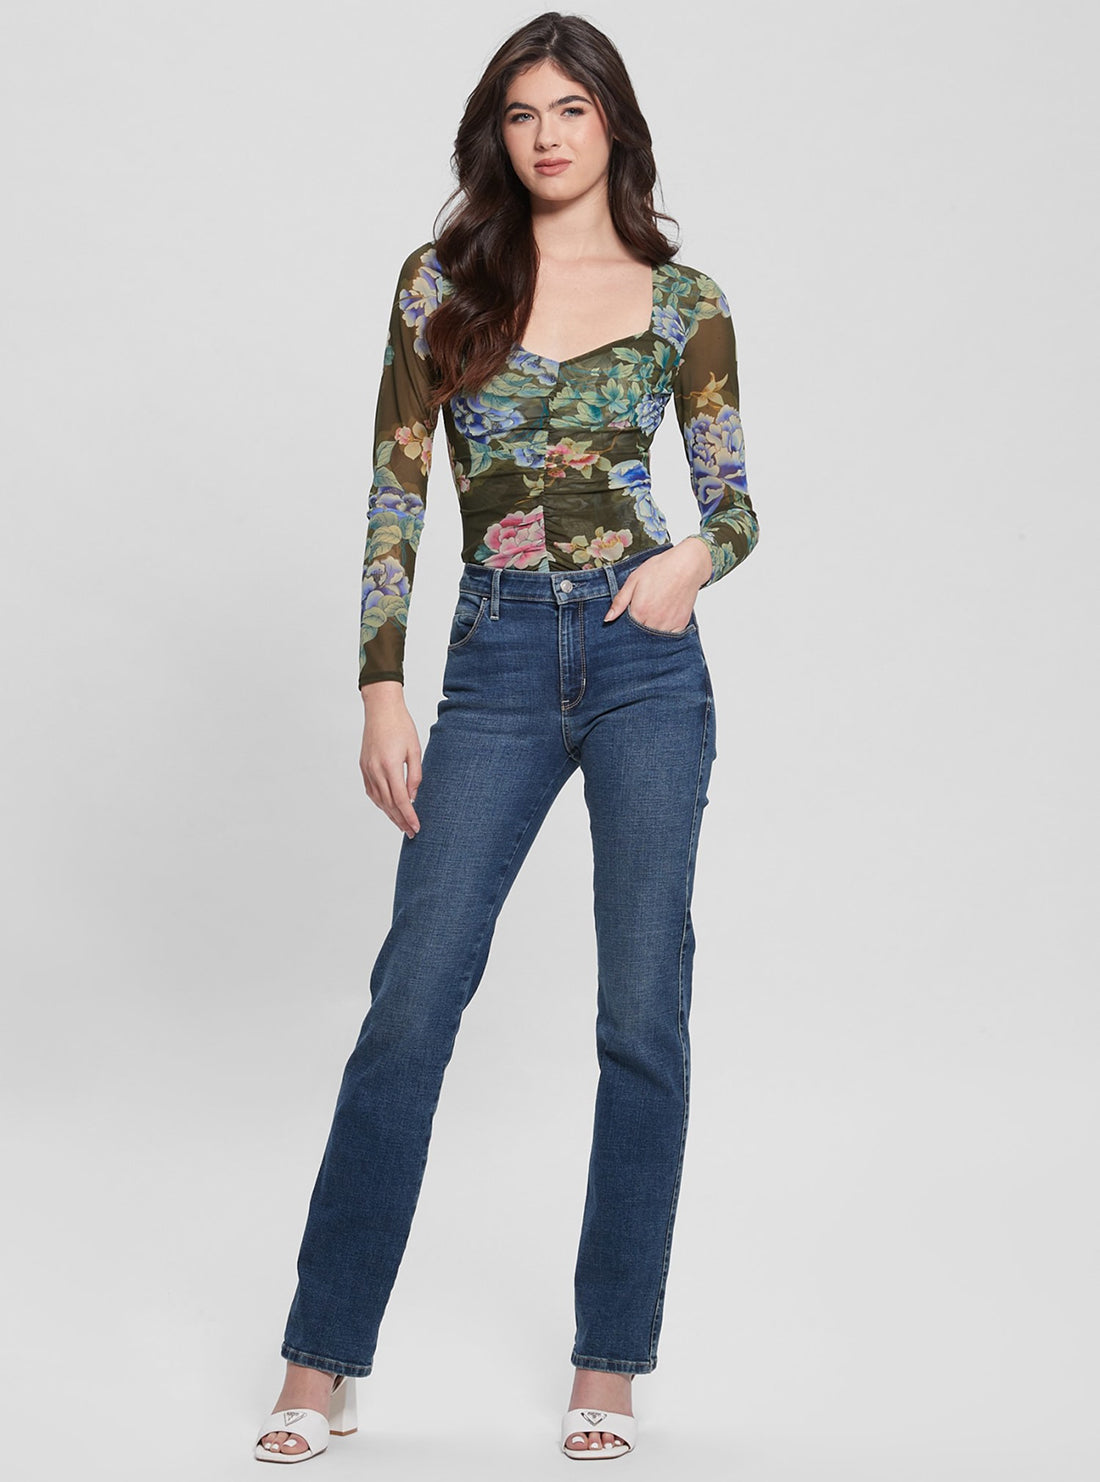 Eco Floral Print Shirred Reyla Mesh Top full view